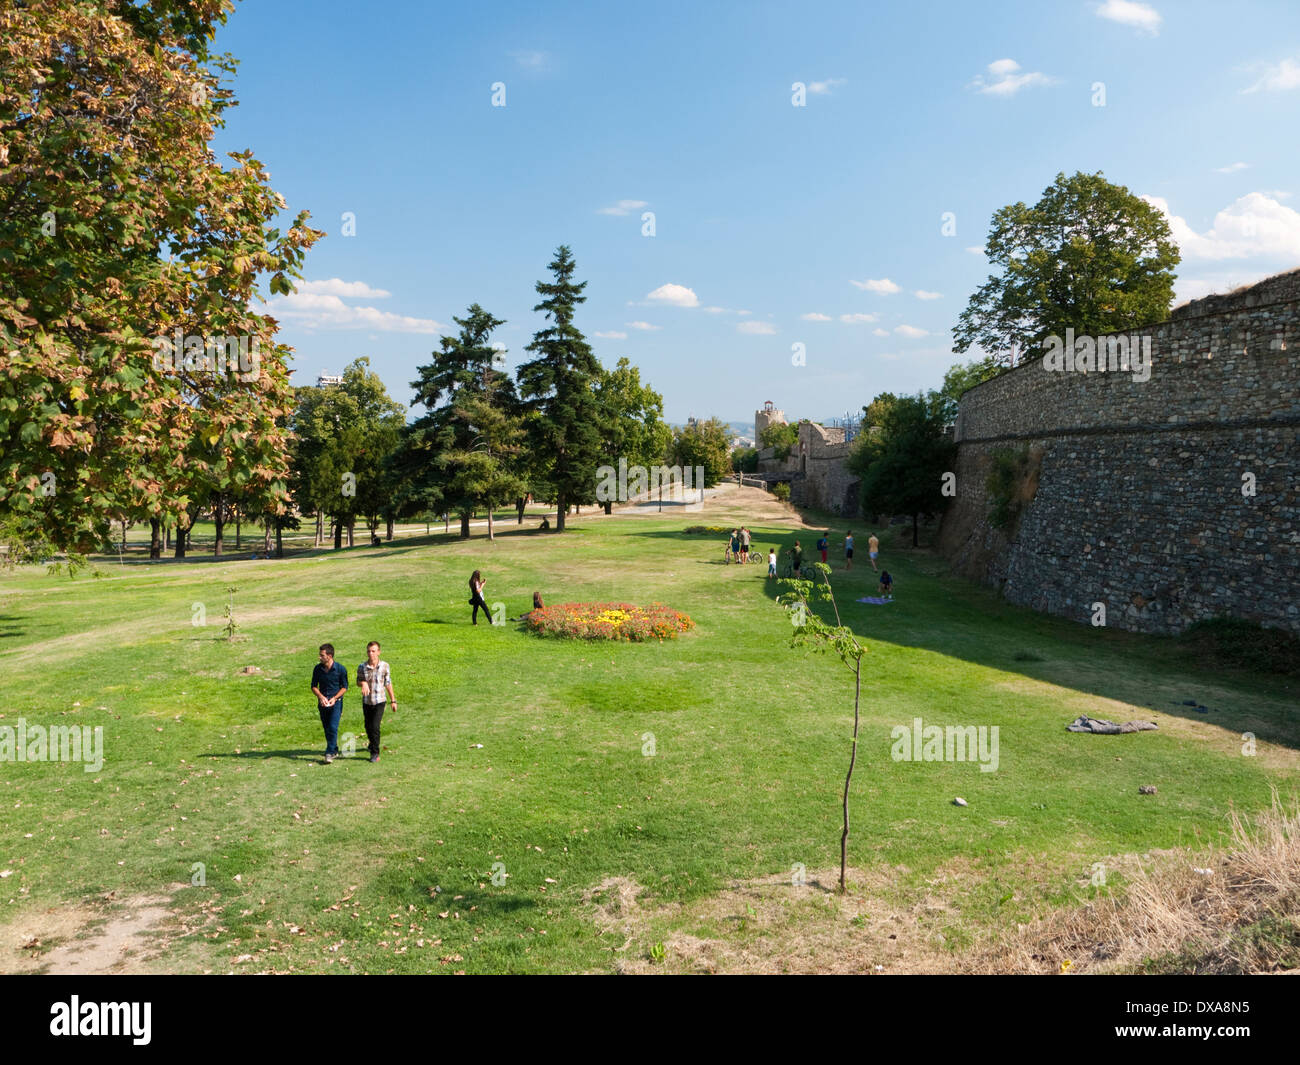 Young people enjoy the gardens outside the Kale Fortress in Skopje, Macedonia Stock Photo